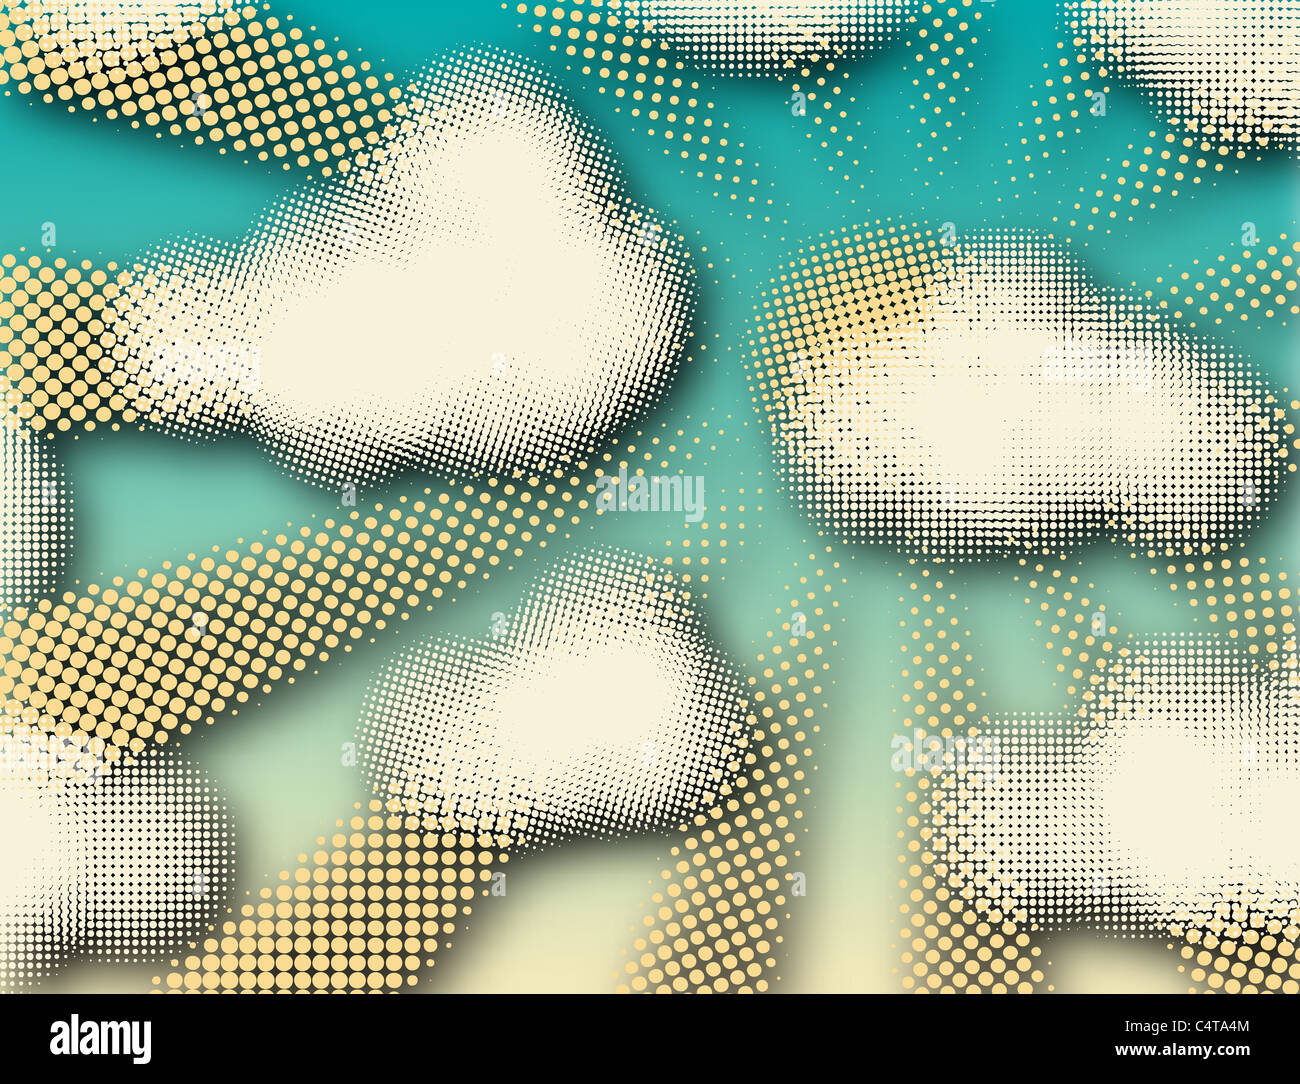 Illustrated design of halftone cumulus clouds and sunshine Stock Photo